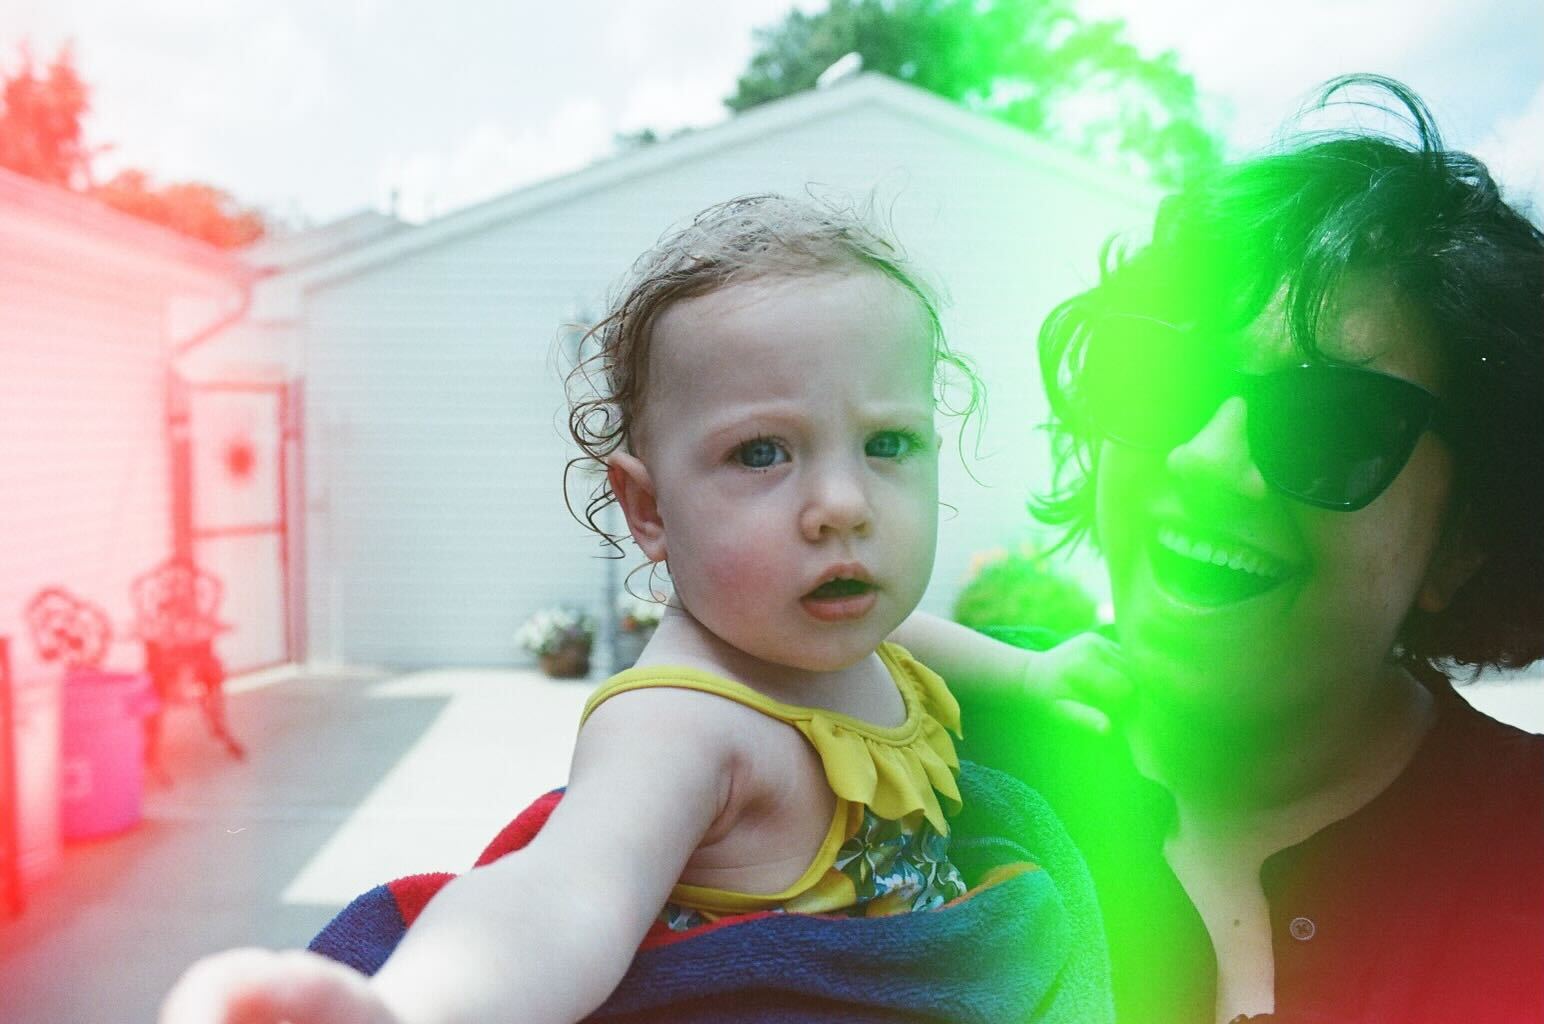 [Image description: Kristin Molloy and her niece. The image has a green lens flair over part of Kristin's face]